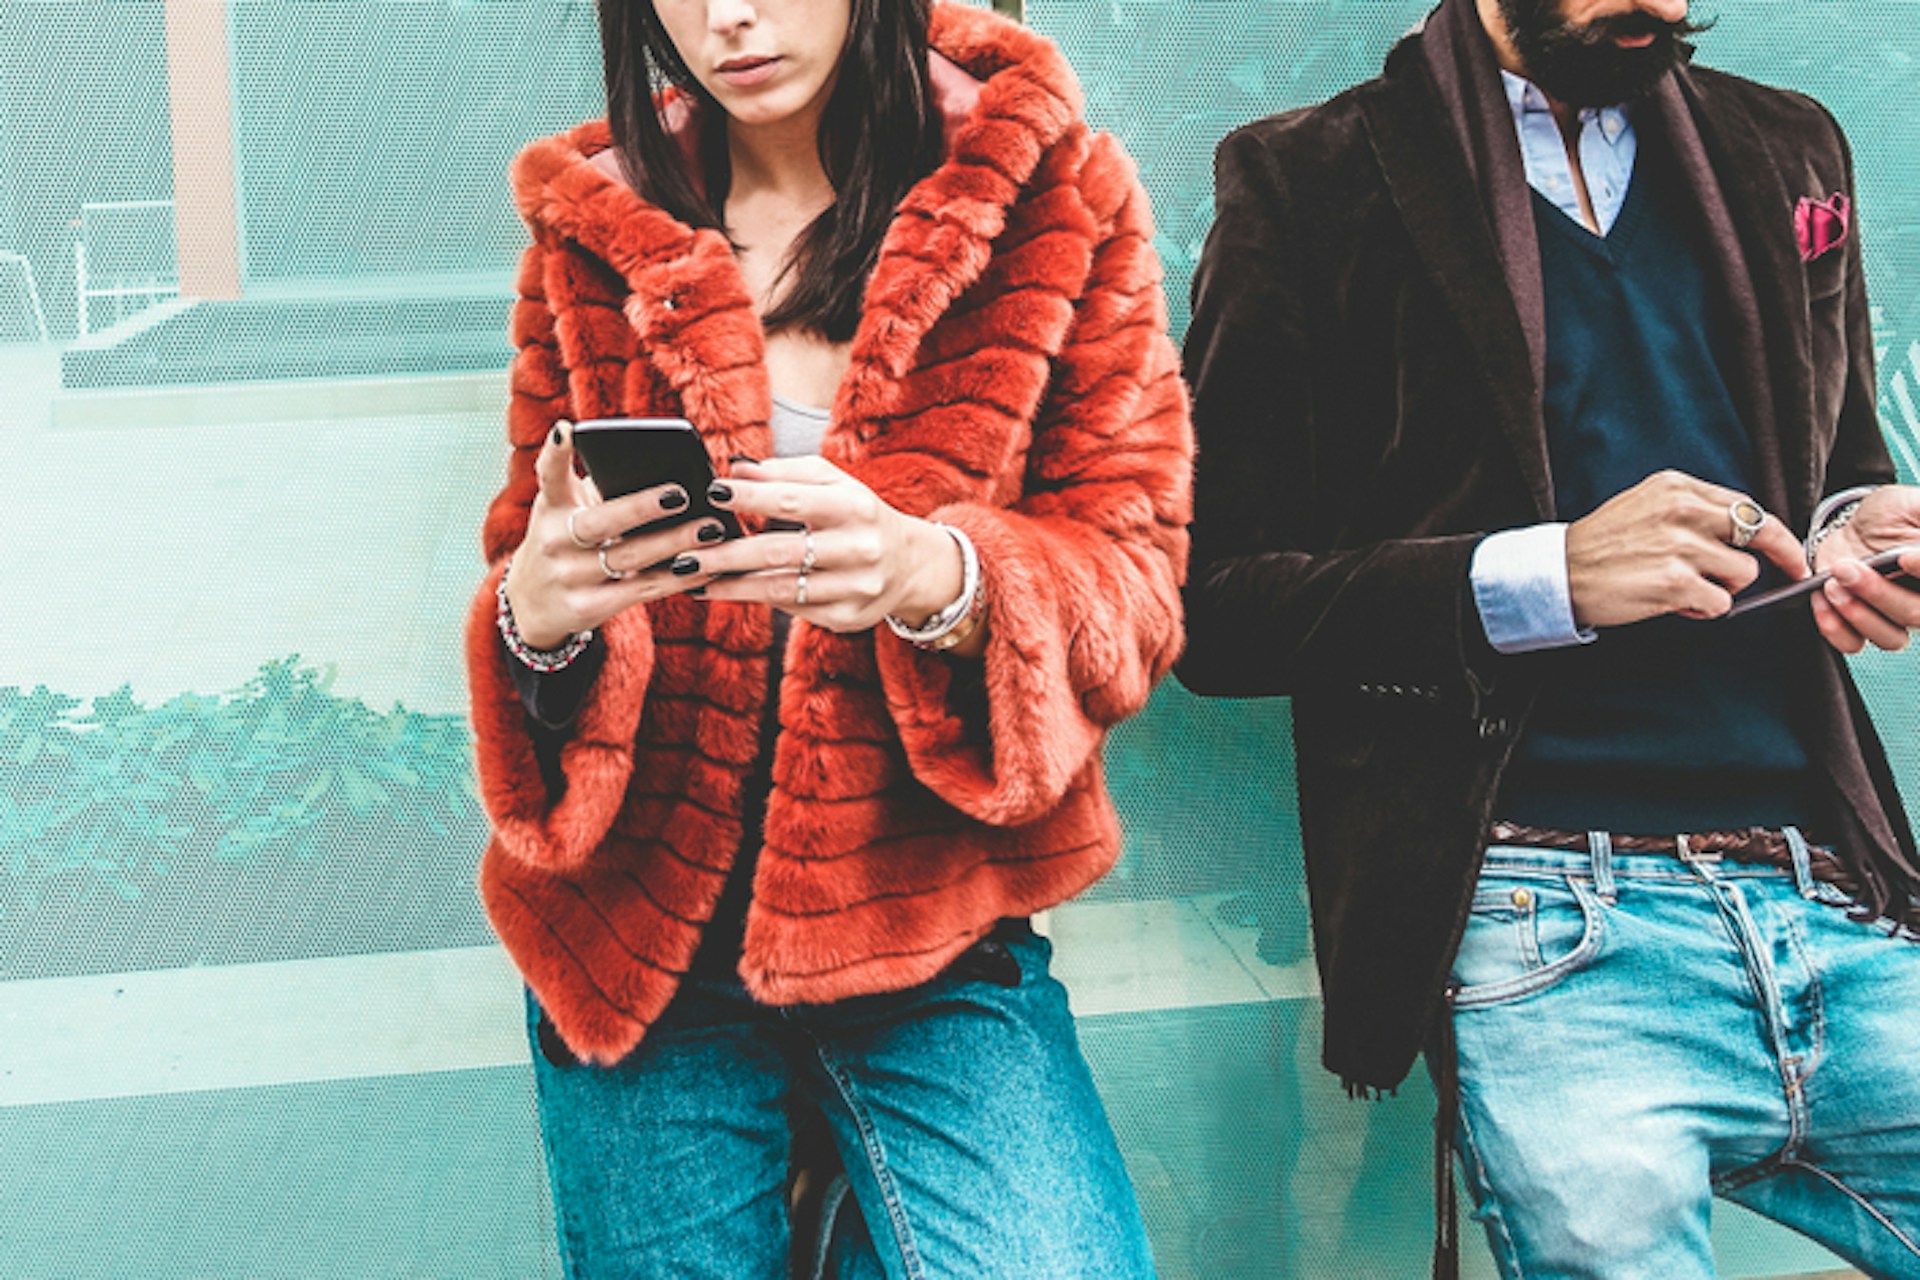 Two fashionable models in textured jackets looking at their smartphones